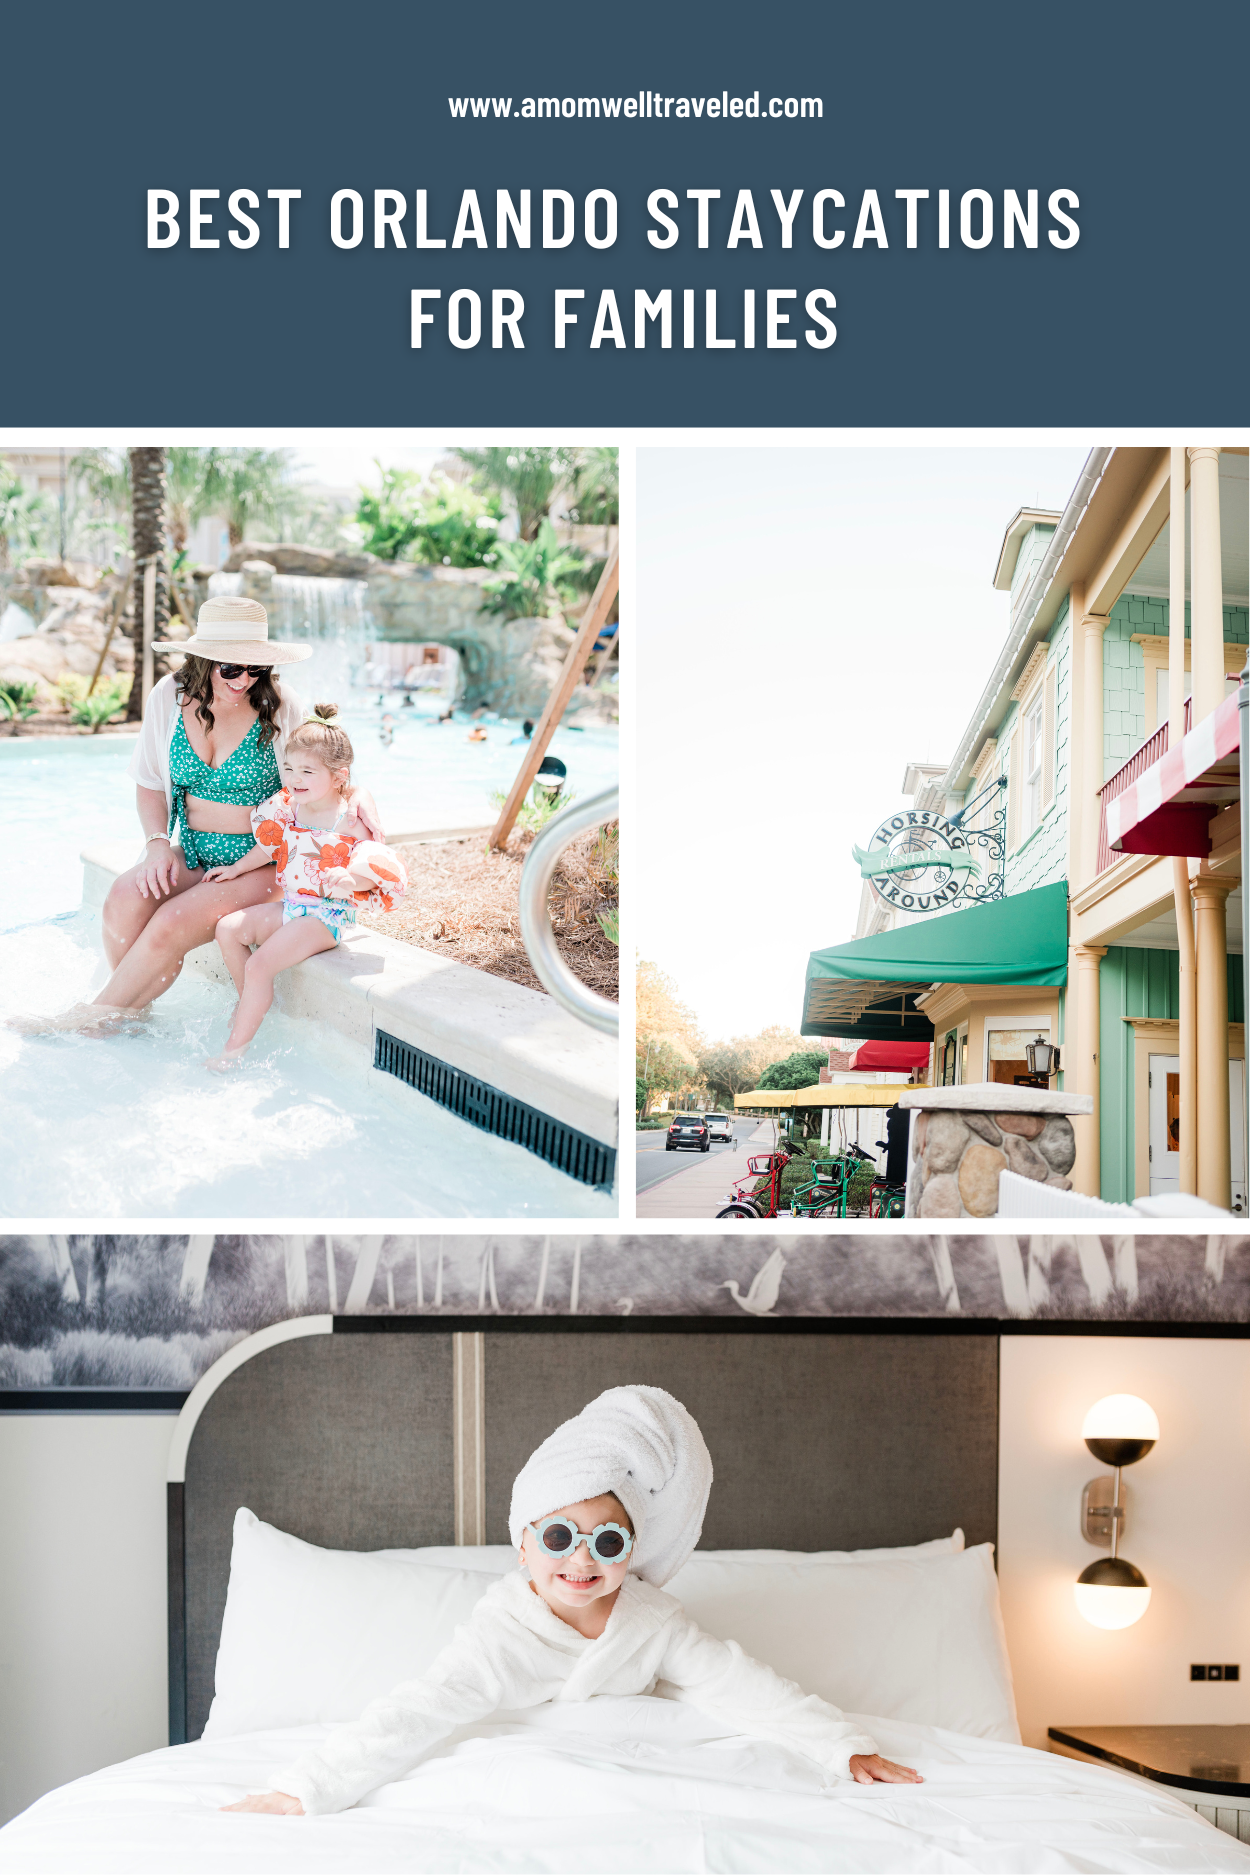 Best Orlando Staycations for families